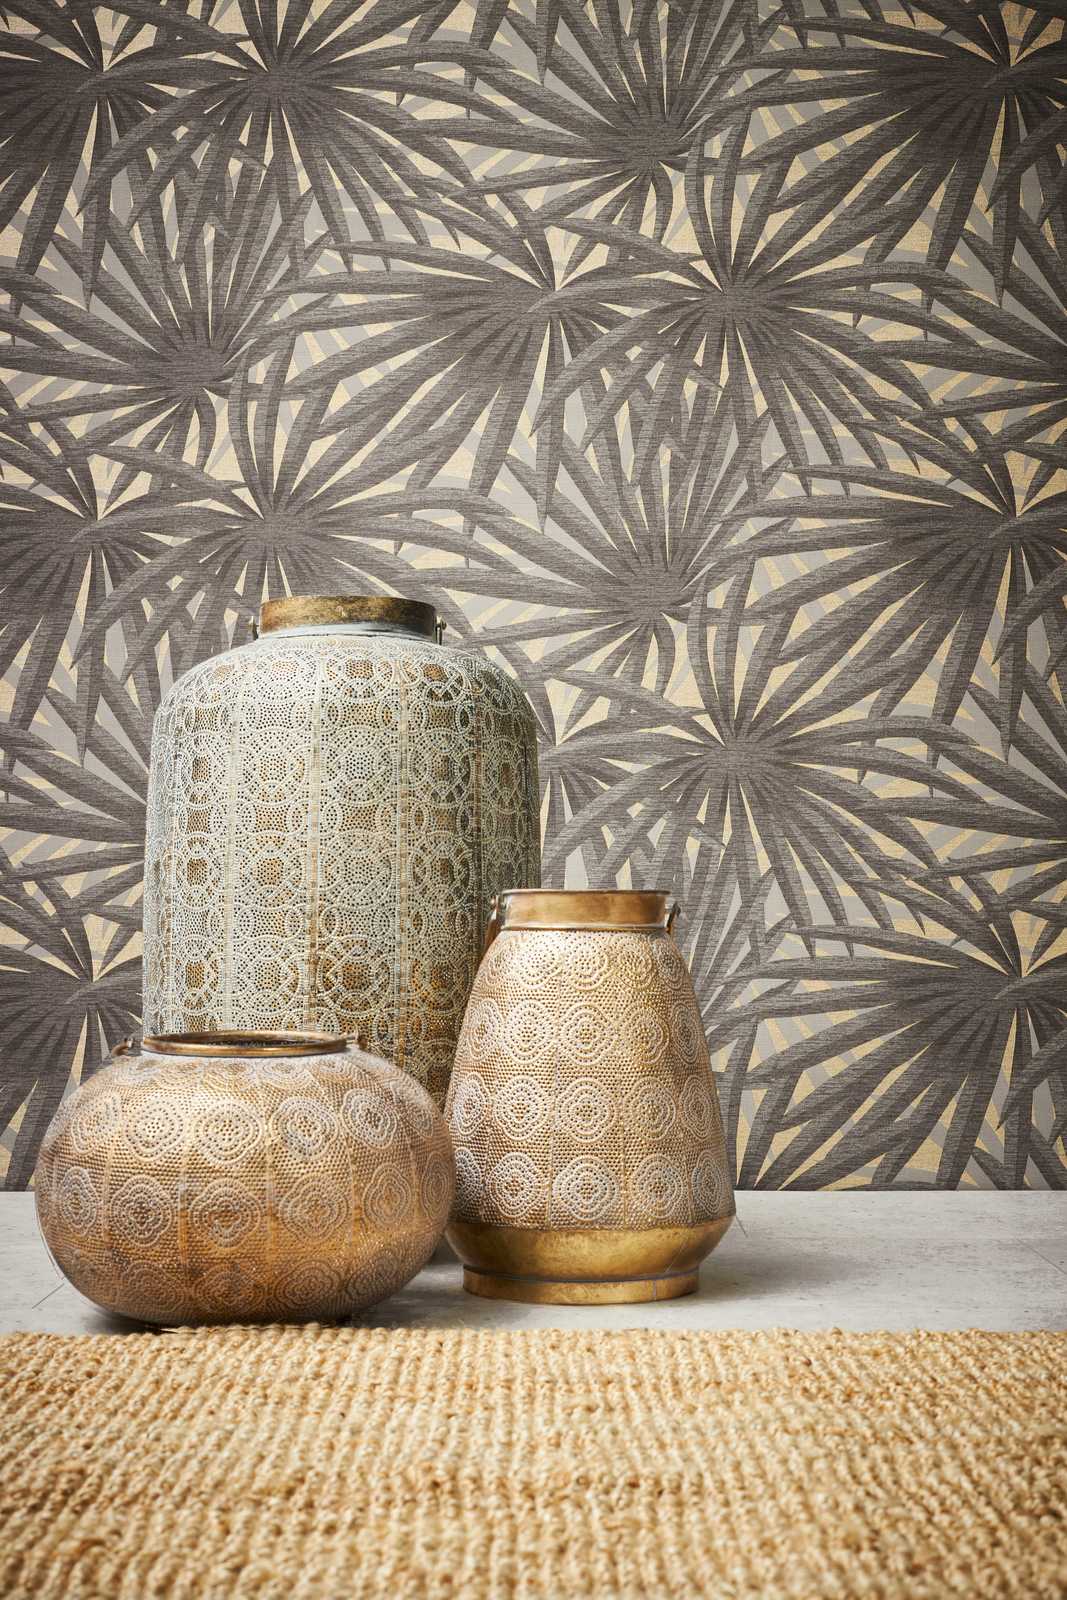             Wallpaper with leaf pattern and metallic accents - grey, metallic
        